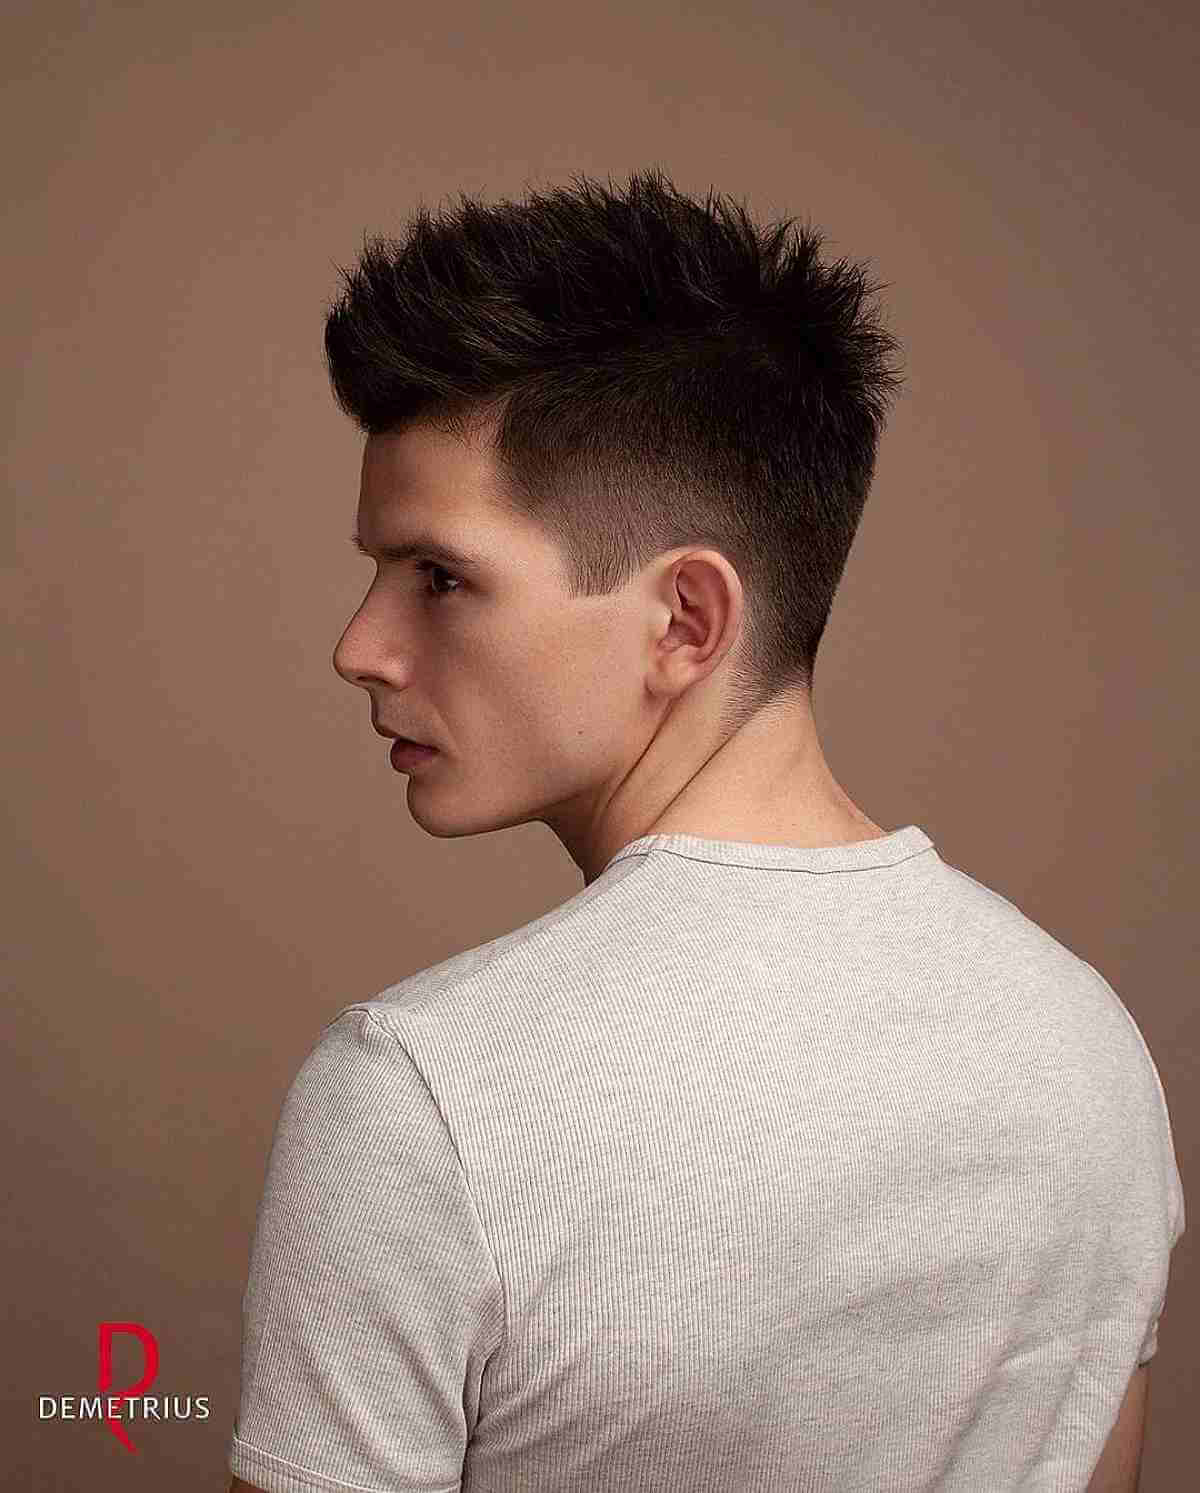 Brushed Up Spiky Hair + Tapered Quiff Shape